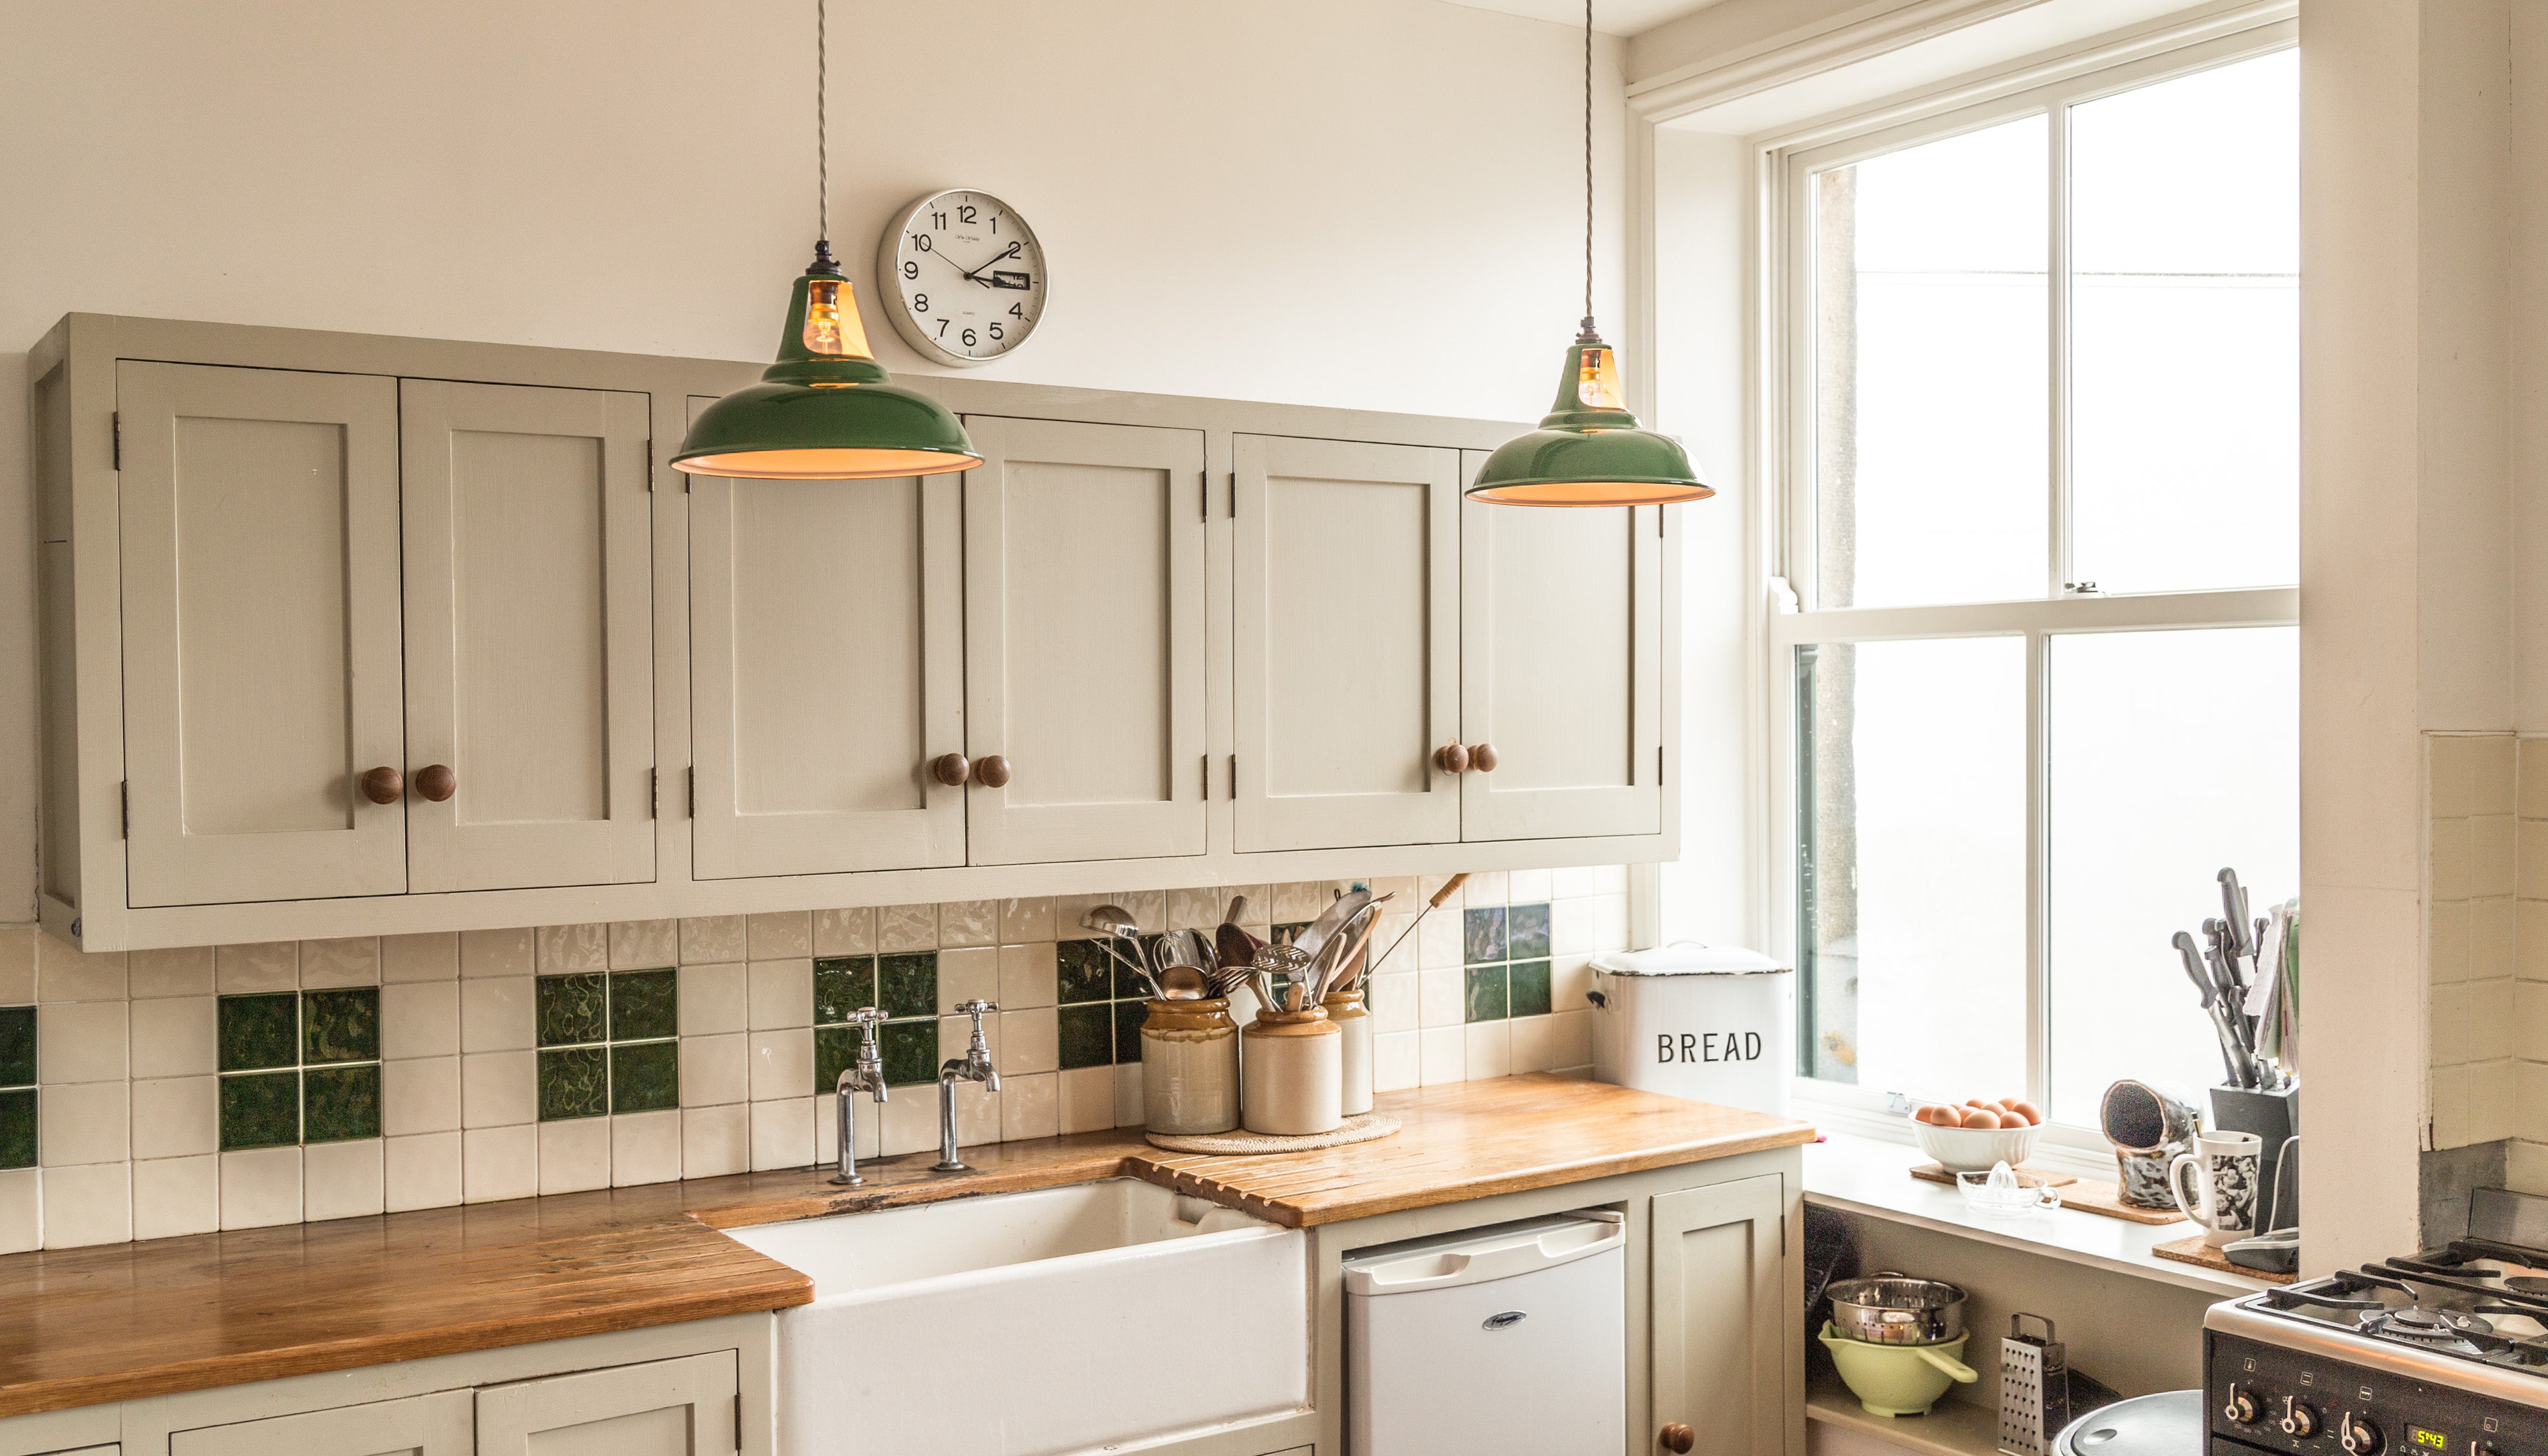 Ceiling Lights For Kitchen The Options Assessed Urban